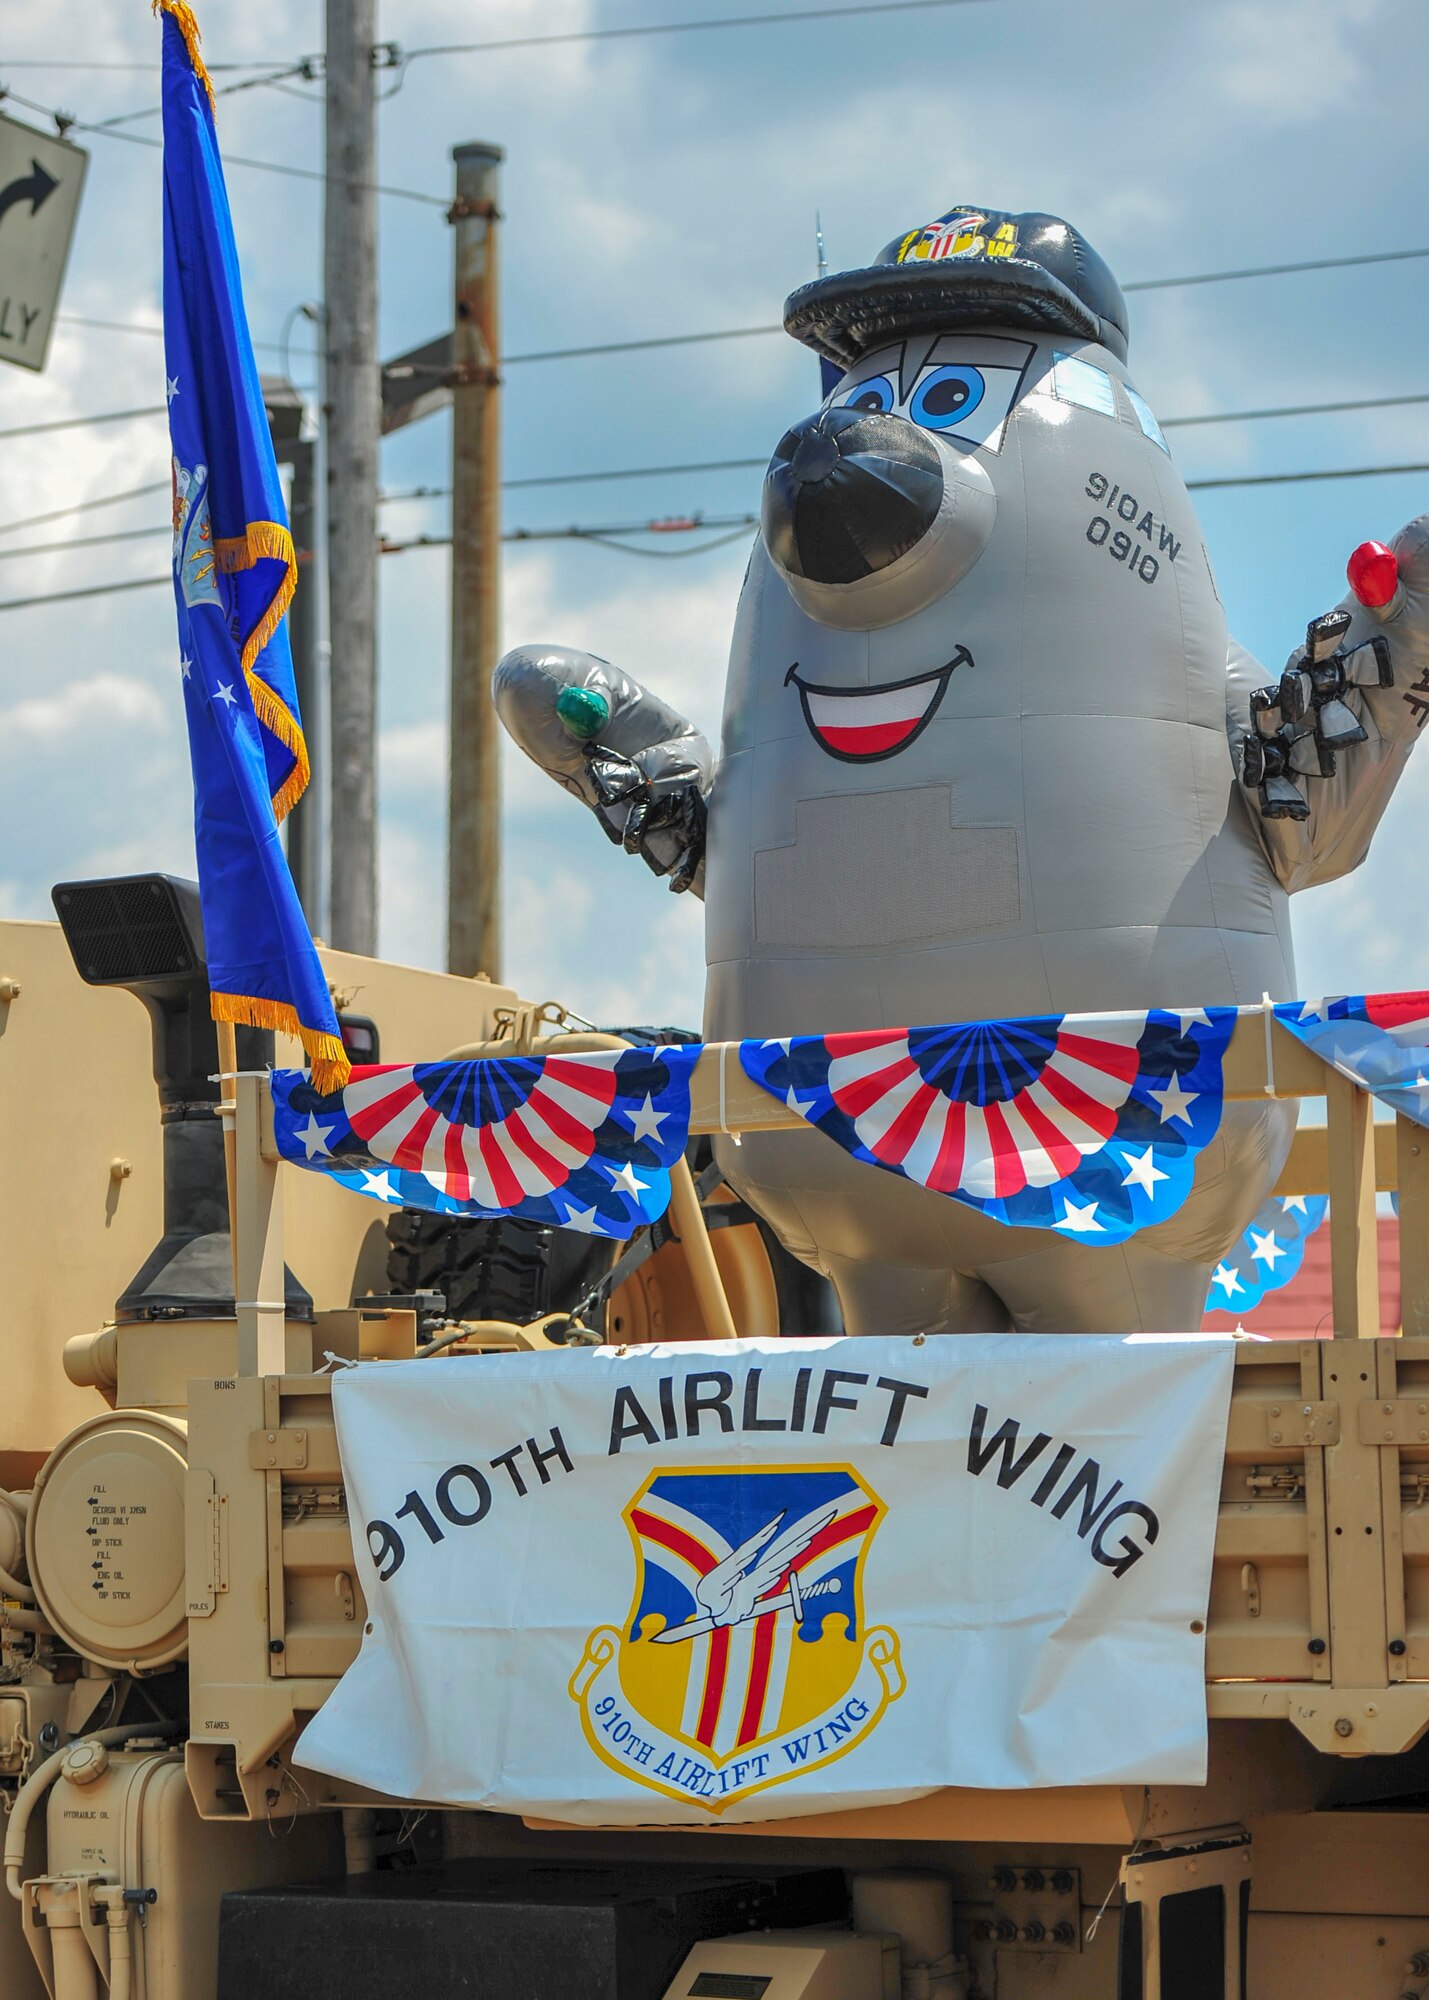 Winger, a caricature of a C-130H Hercules aircraft that serves as the 910th Airlift Wing's mascot, waves to the crowd during a Fourth of July parade in Austintown, Ohio.